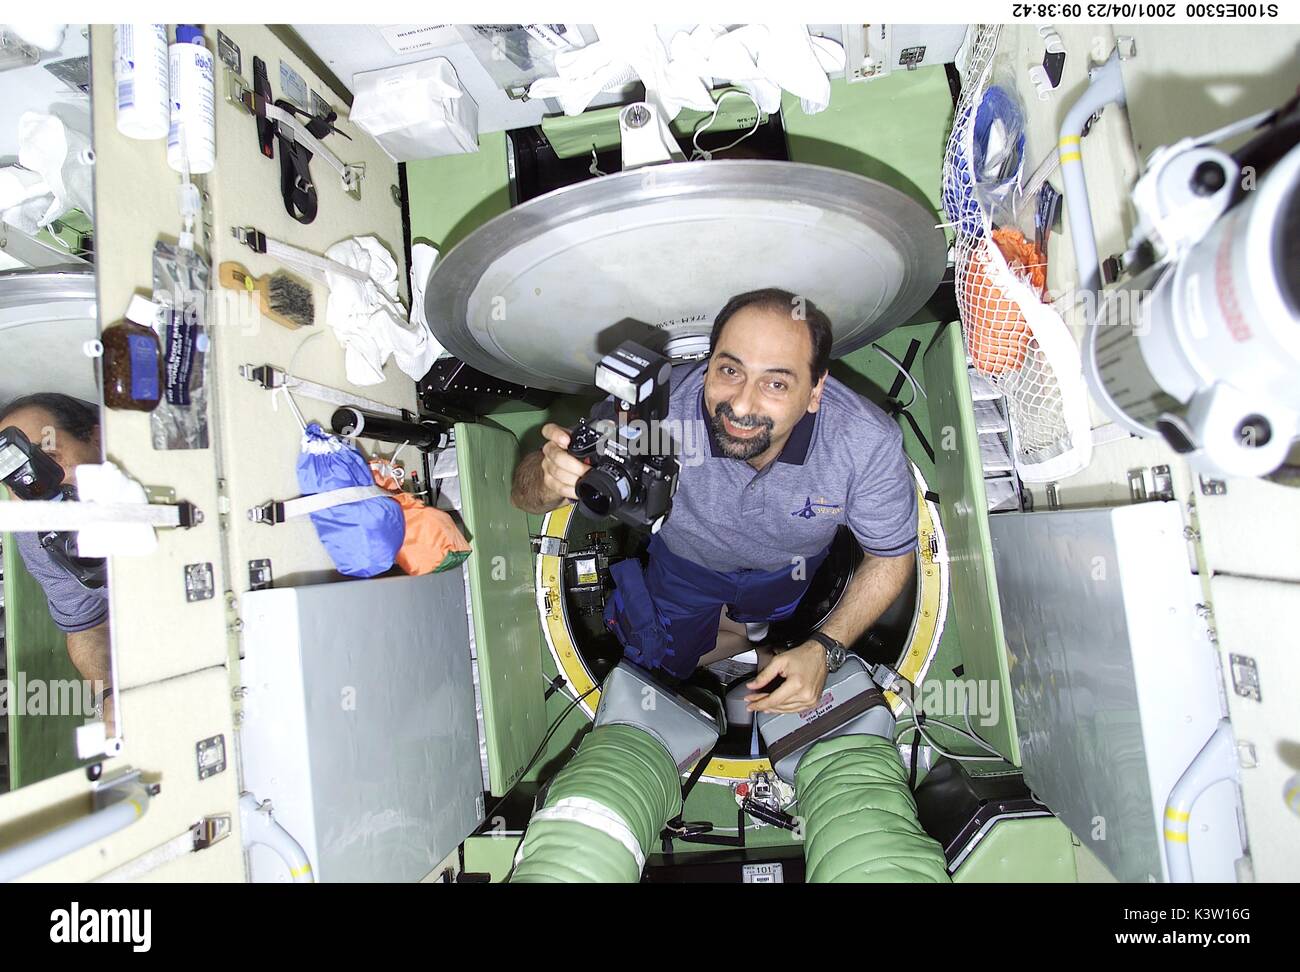 NASA Space Shuttle Endeavour STS-100 mission prime crew member Italian astronaut Umberto Guidoni of the European Space Agency emerges from the hatch in the Zvezda Service Module aboard the International Space Station April 23, 2001 in Earth orbit.  (photo by NASA Photo via Planetpix) Stock Photo